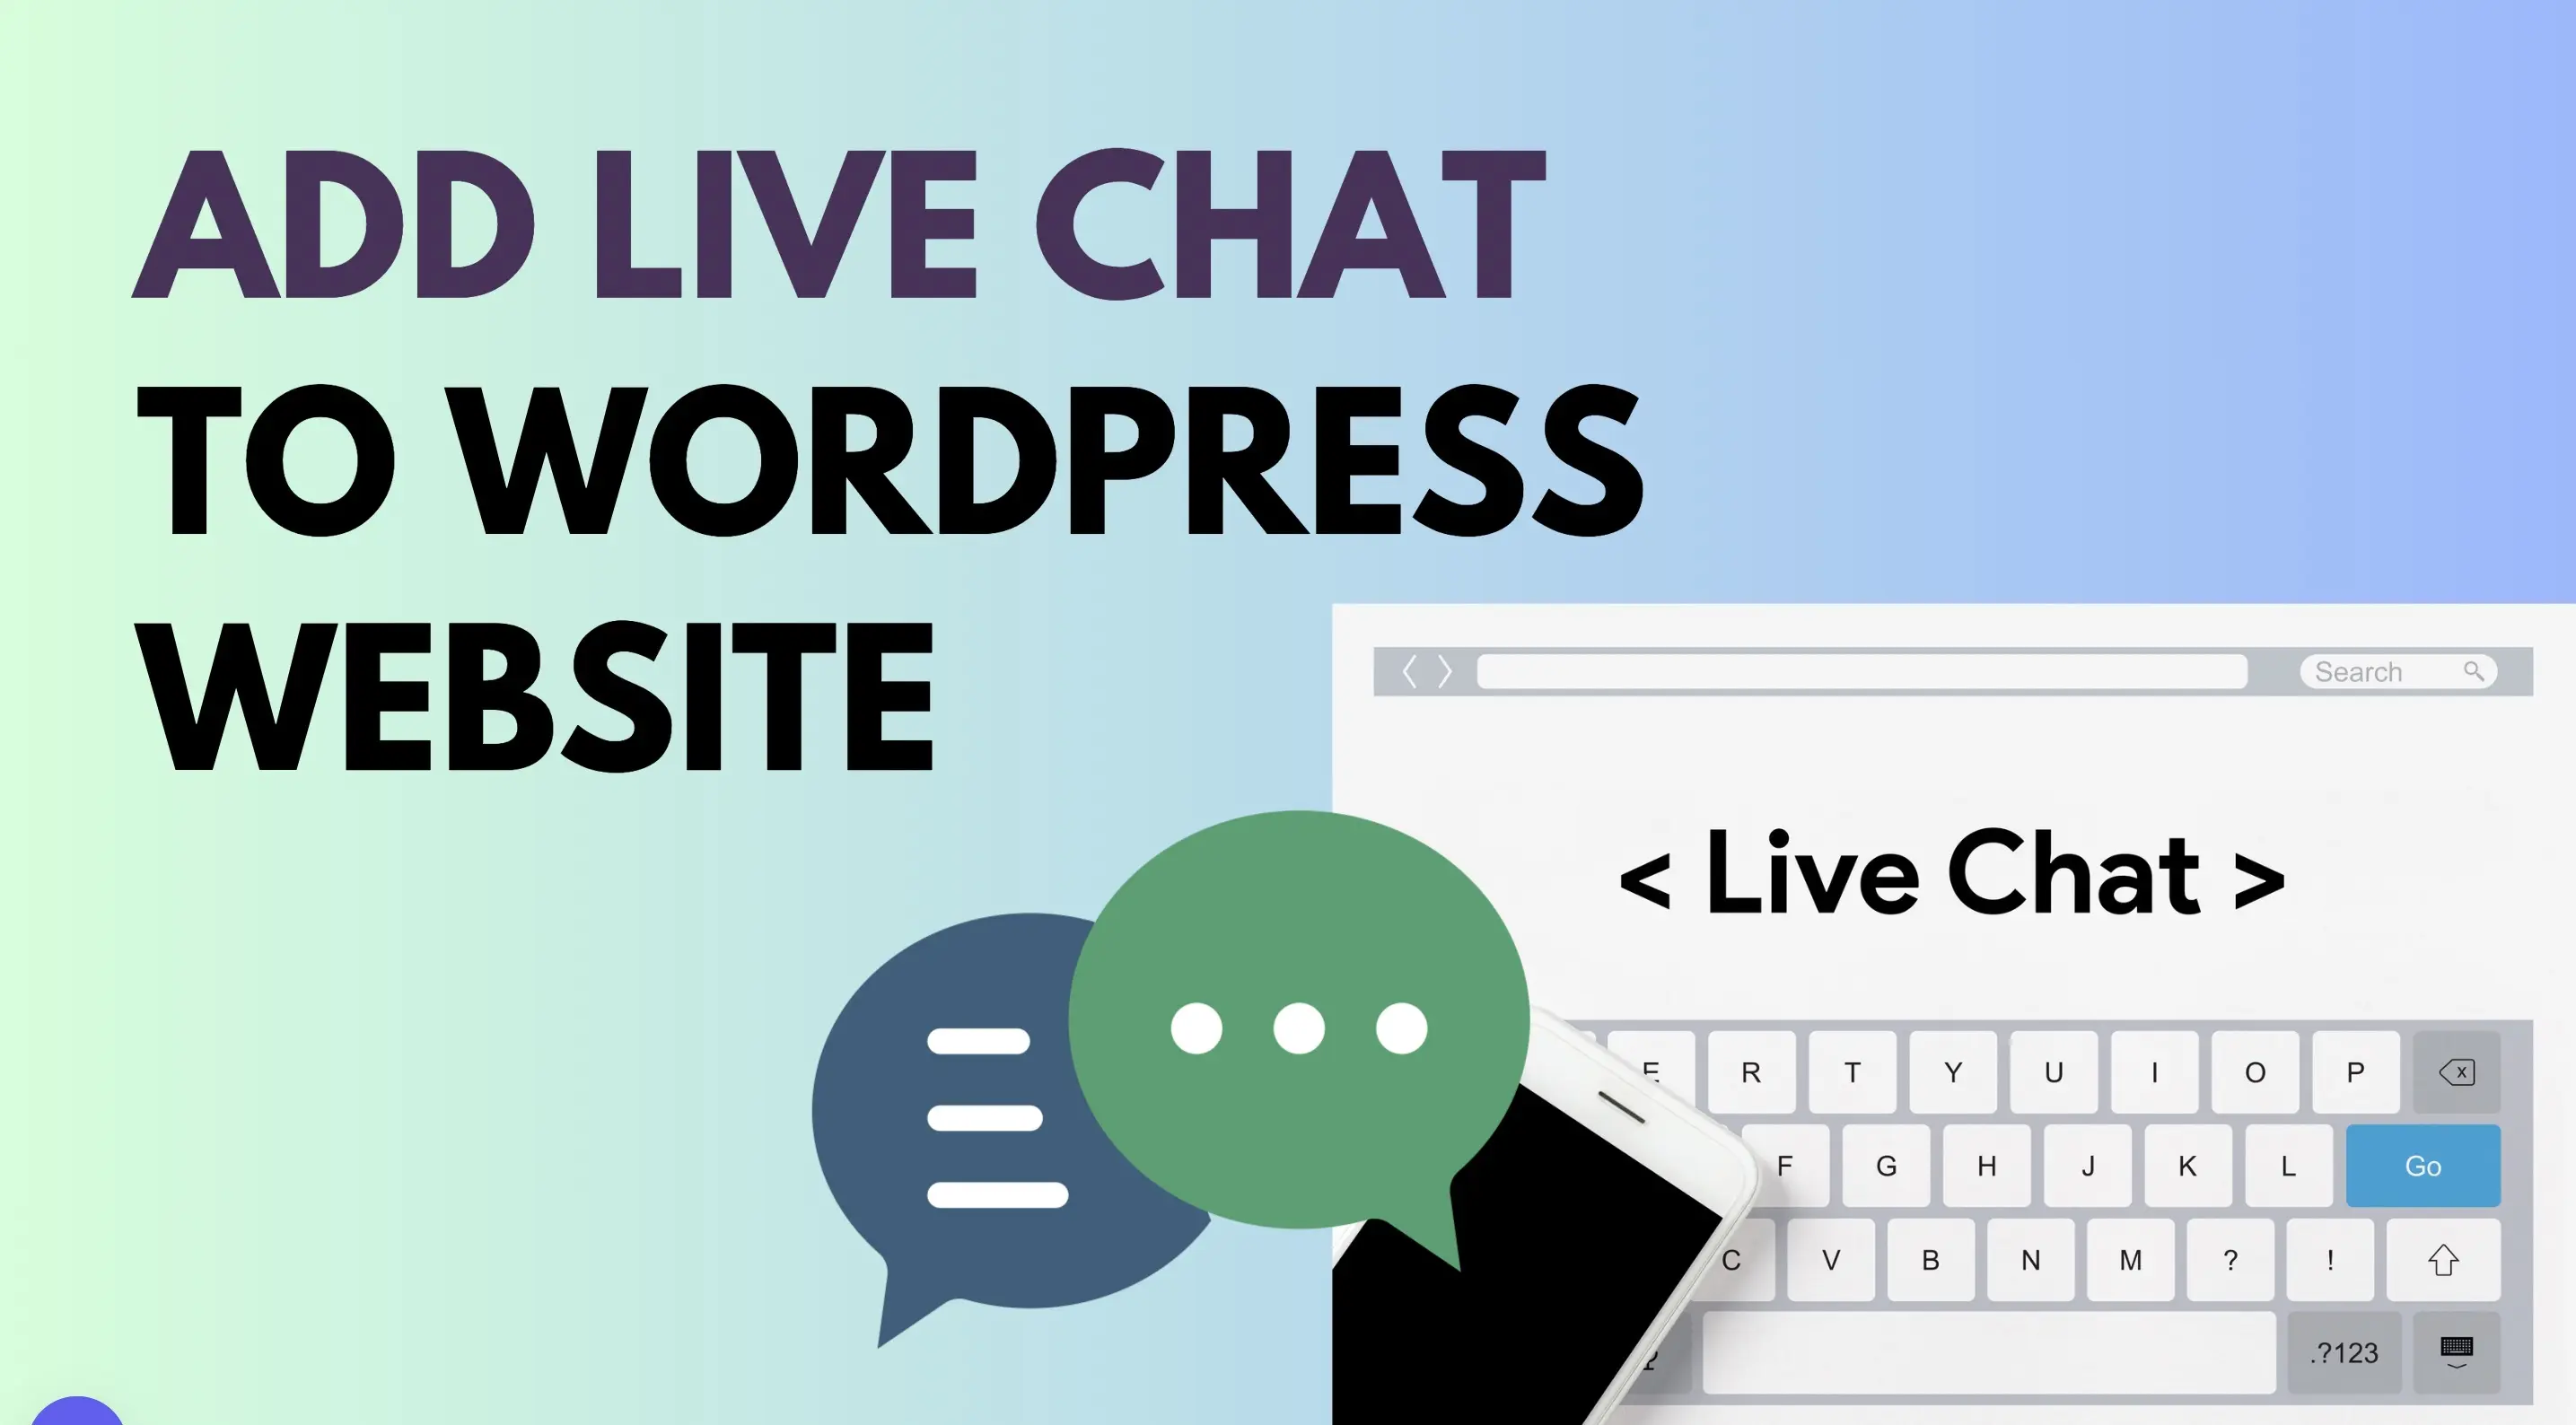 Step by Step Guide on Adding Live Chat to Your WordPress Website